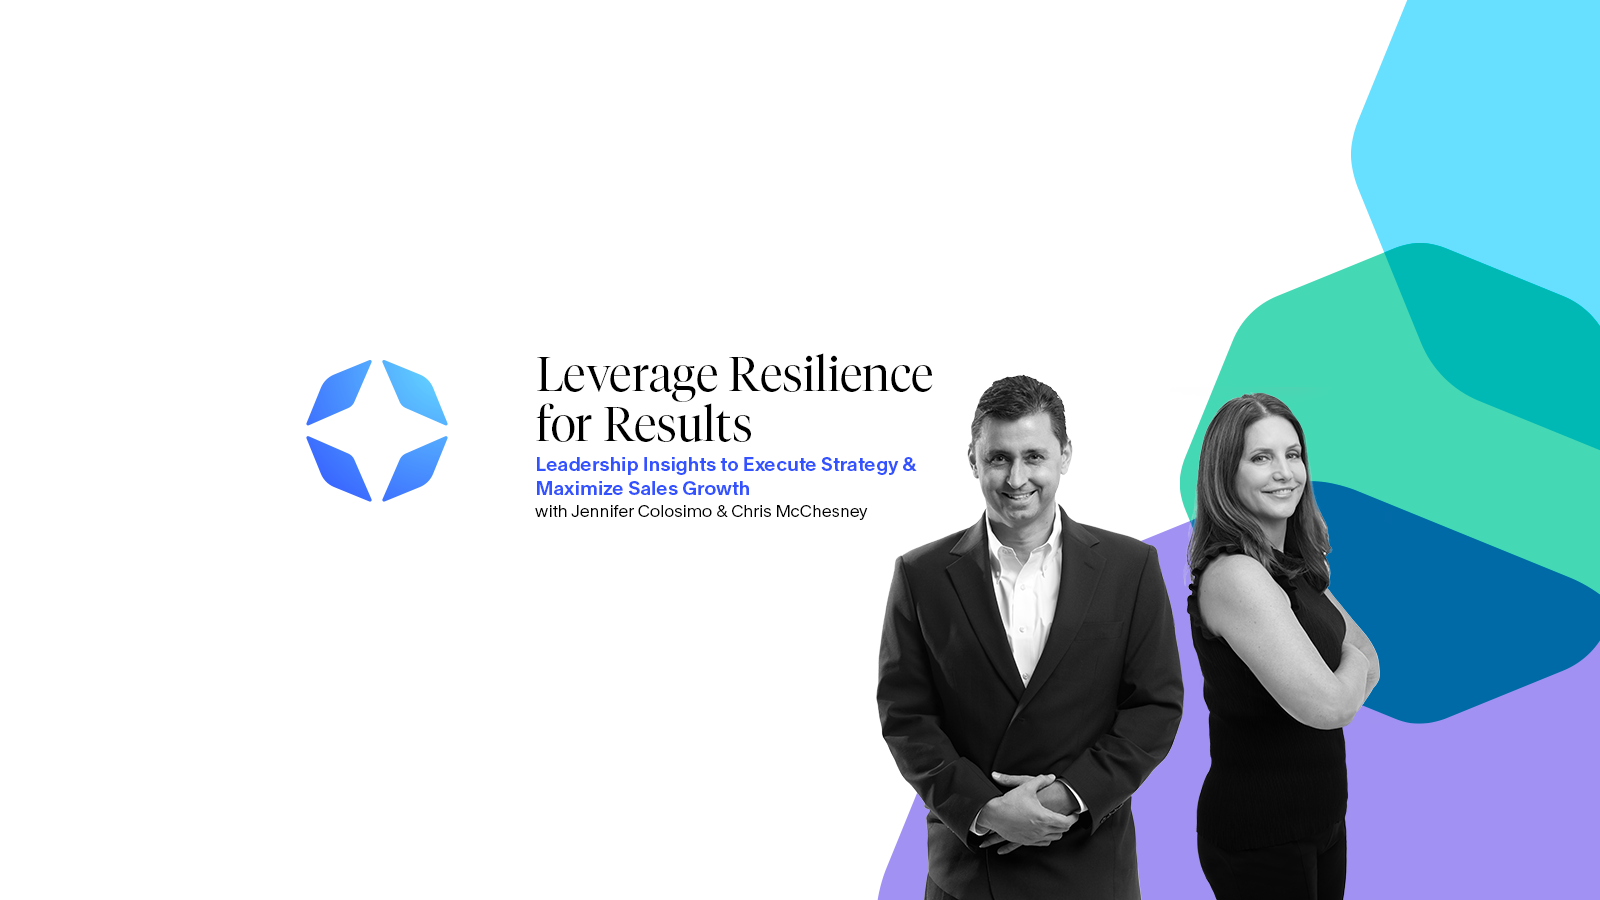 Leverage Resilience for Results